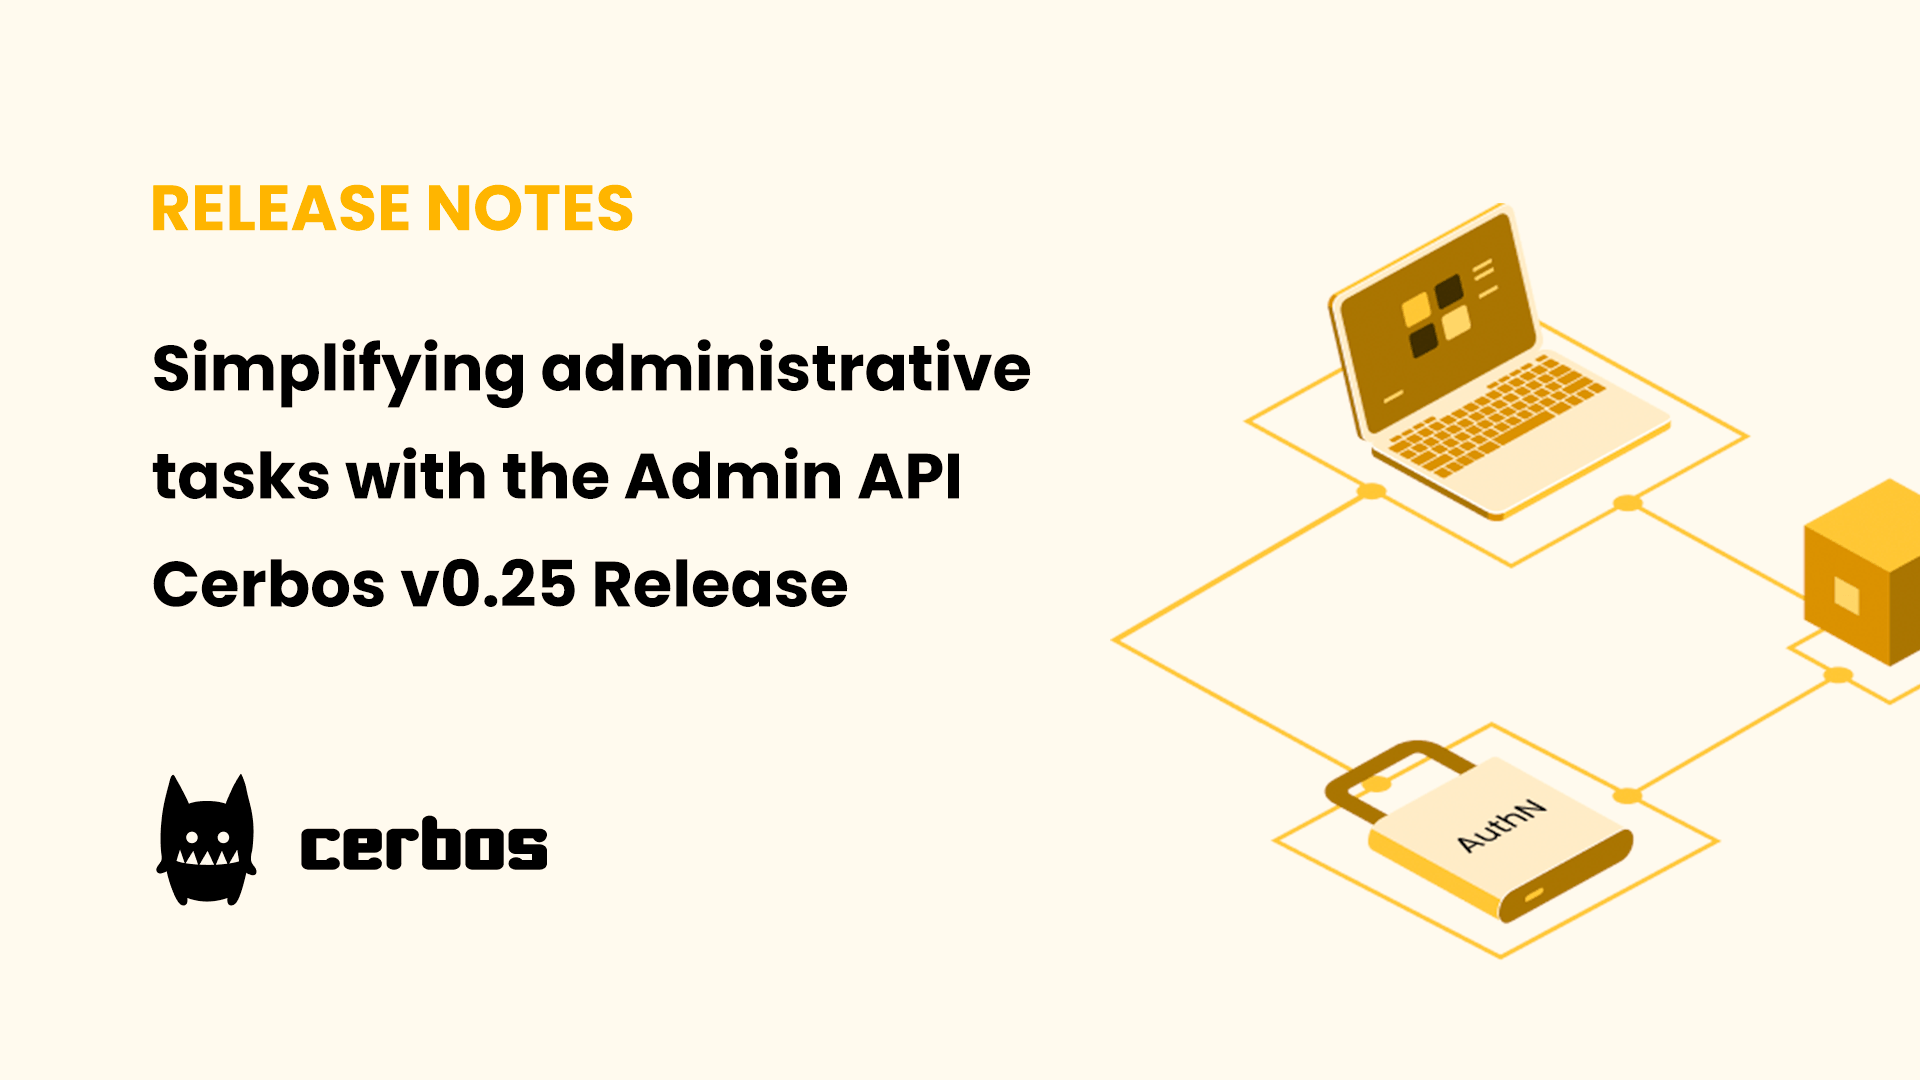 Simplifying administrative tasks with the Admin API - Cerbos v0.25 Release